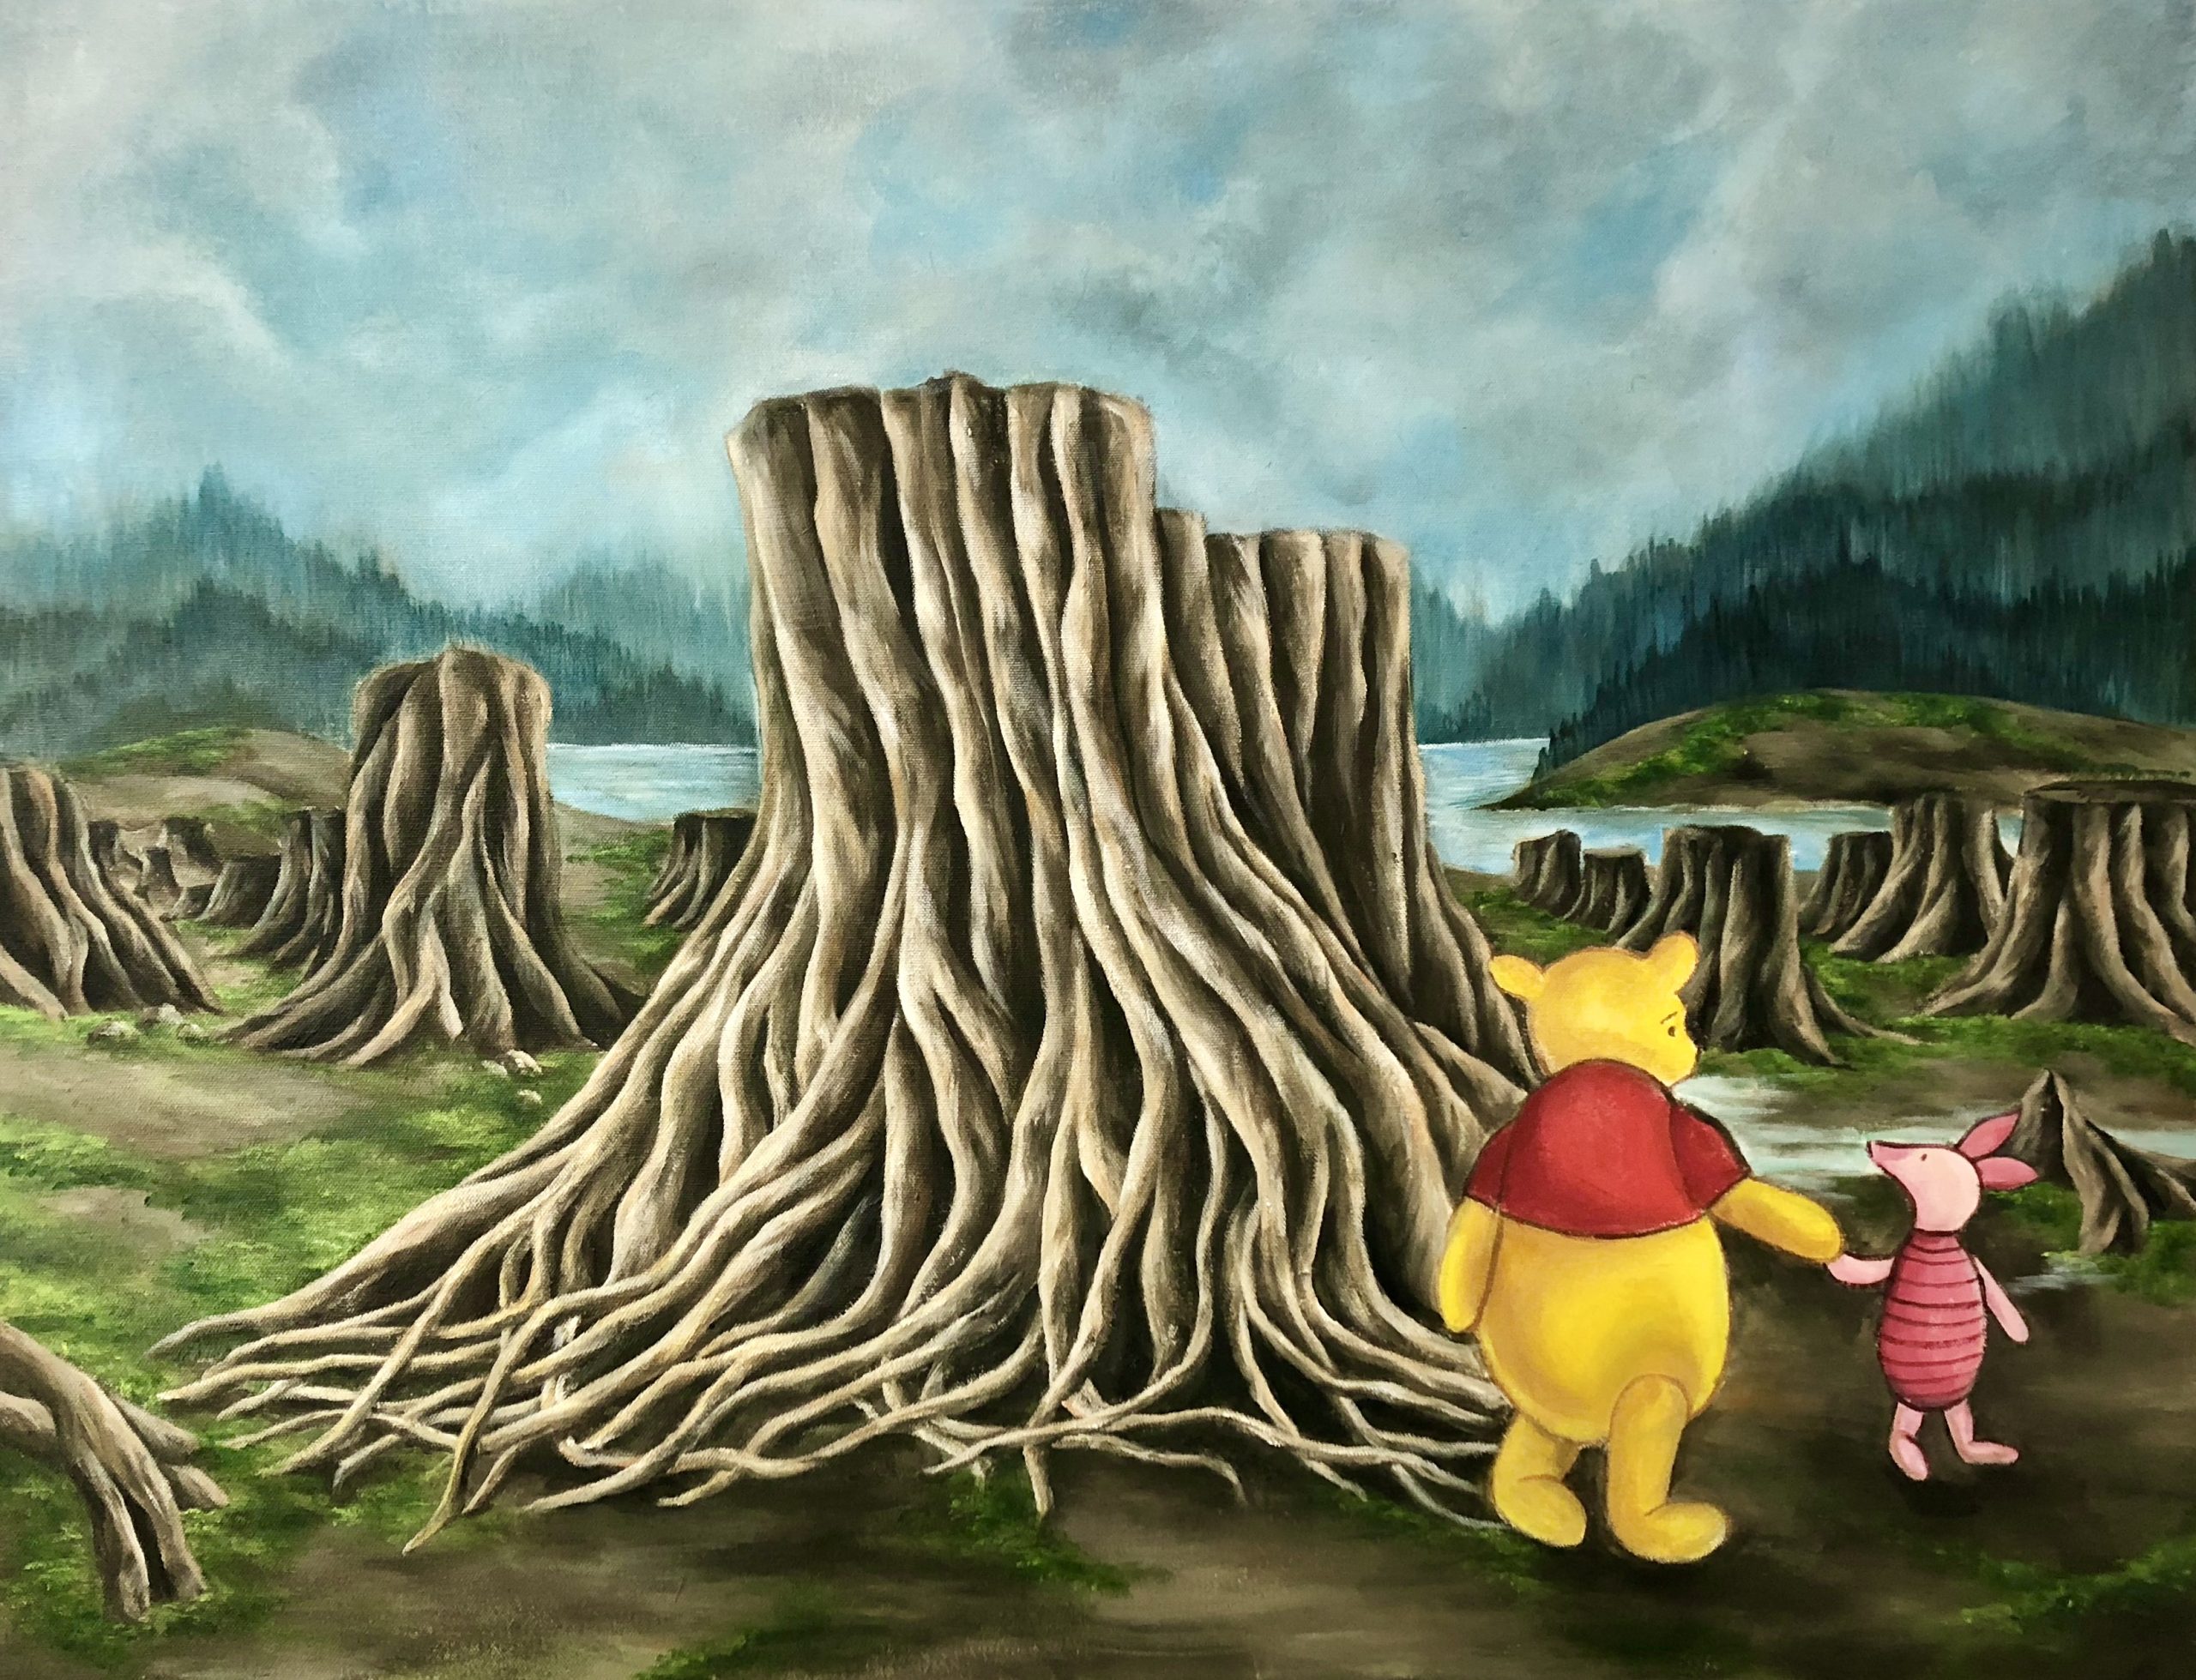 A painting of Winnie the Pooh and Piglet in a destroyed forest.